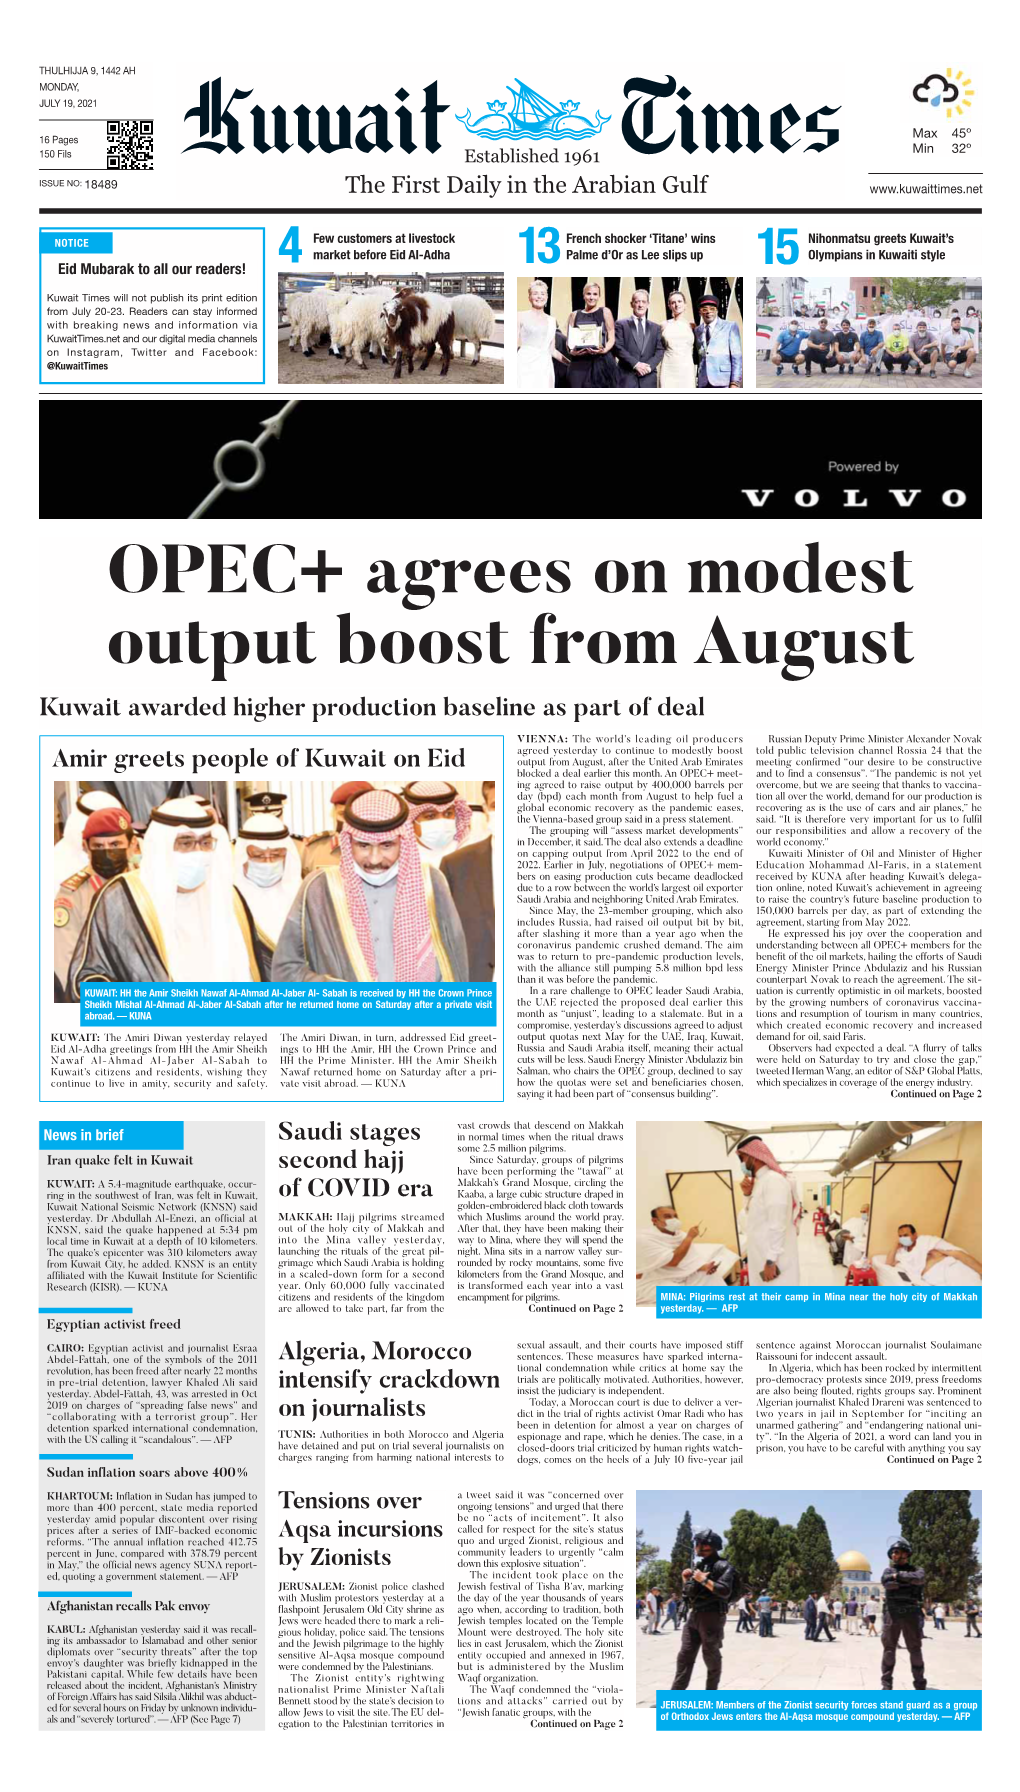 OPEC+ Agrees on Modest Output Boost from August Kuwait Awarded Higher Production Baseline As Part of Deal